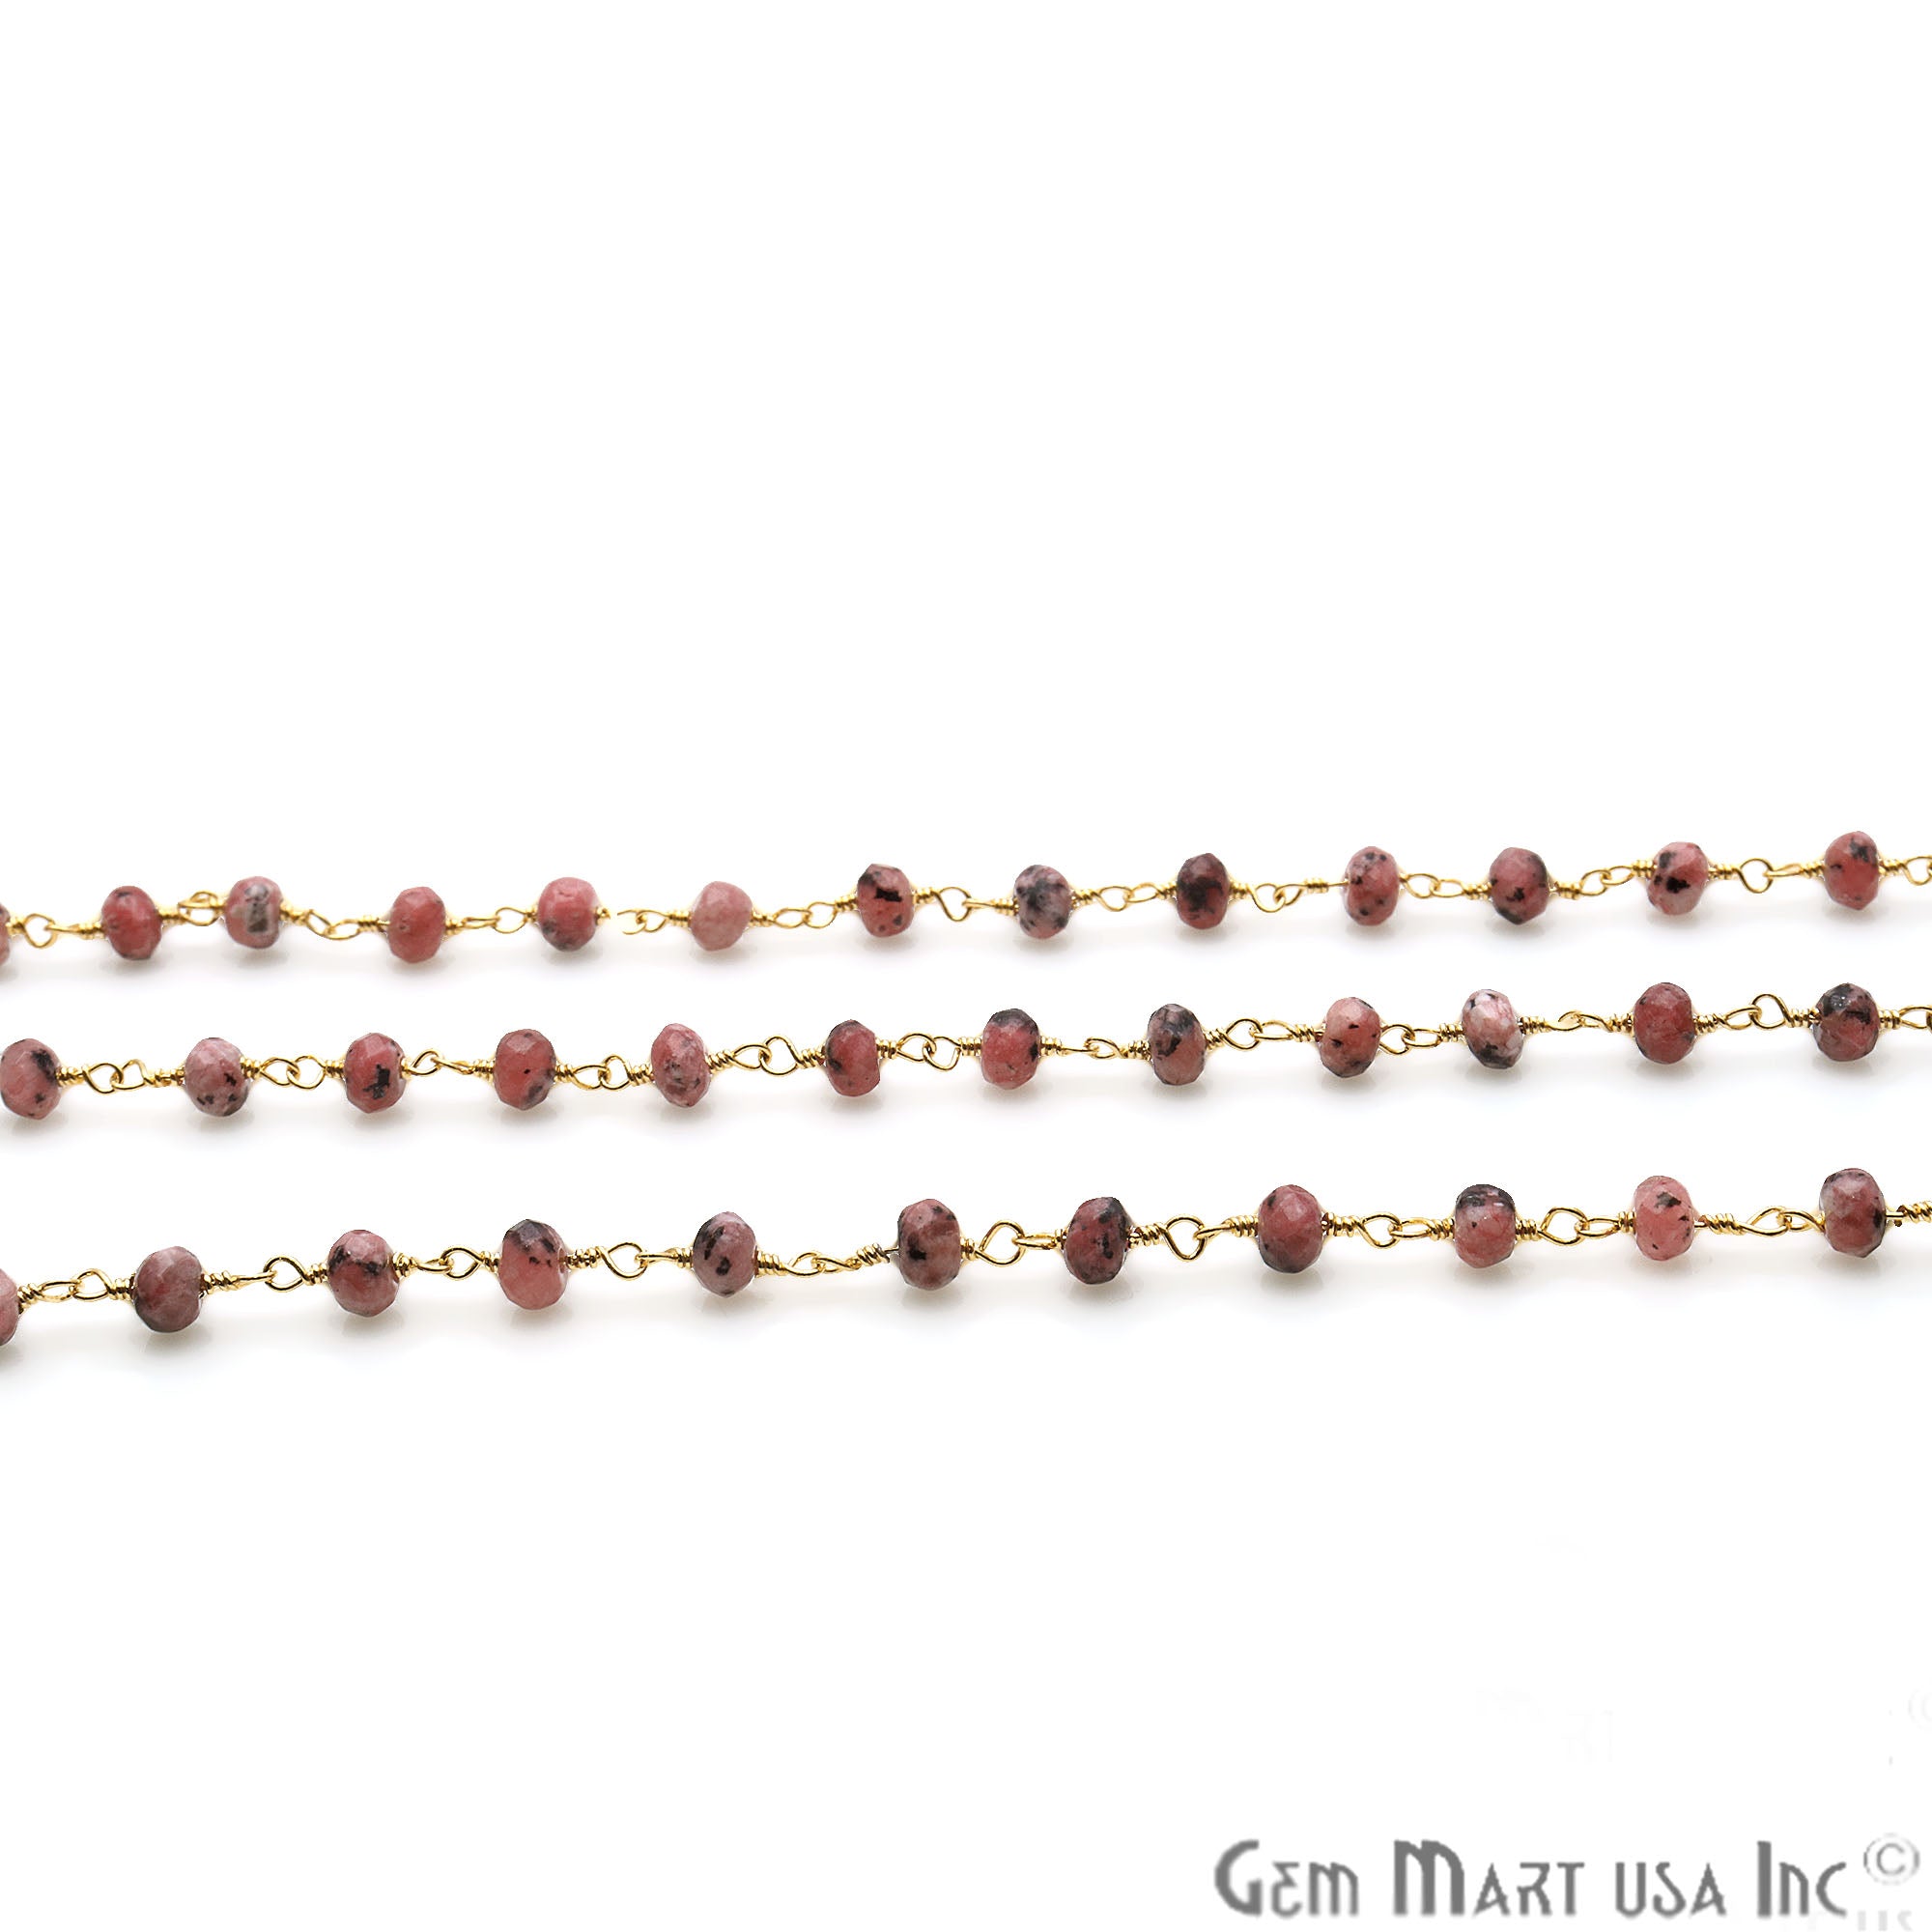 Rhodochrosite Jade Faceted Beads 4mm Gold Plated Wire Wrapped Rosary Chain - GemMartUSA